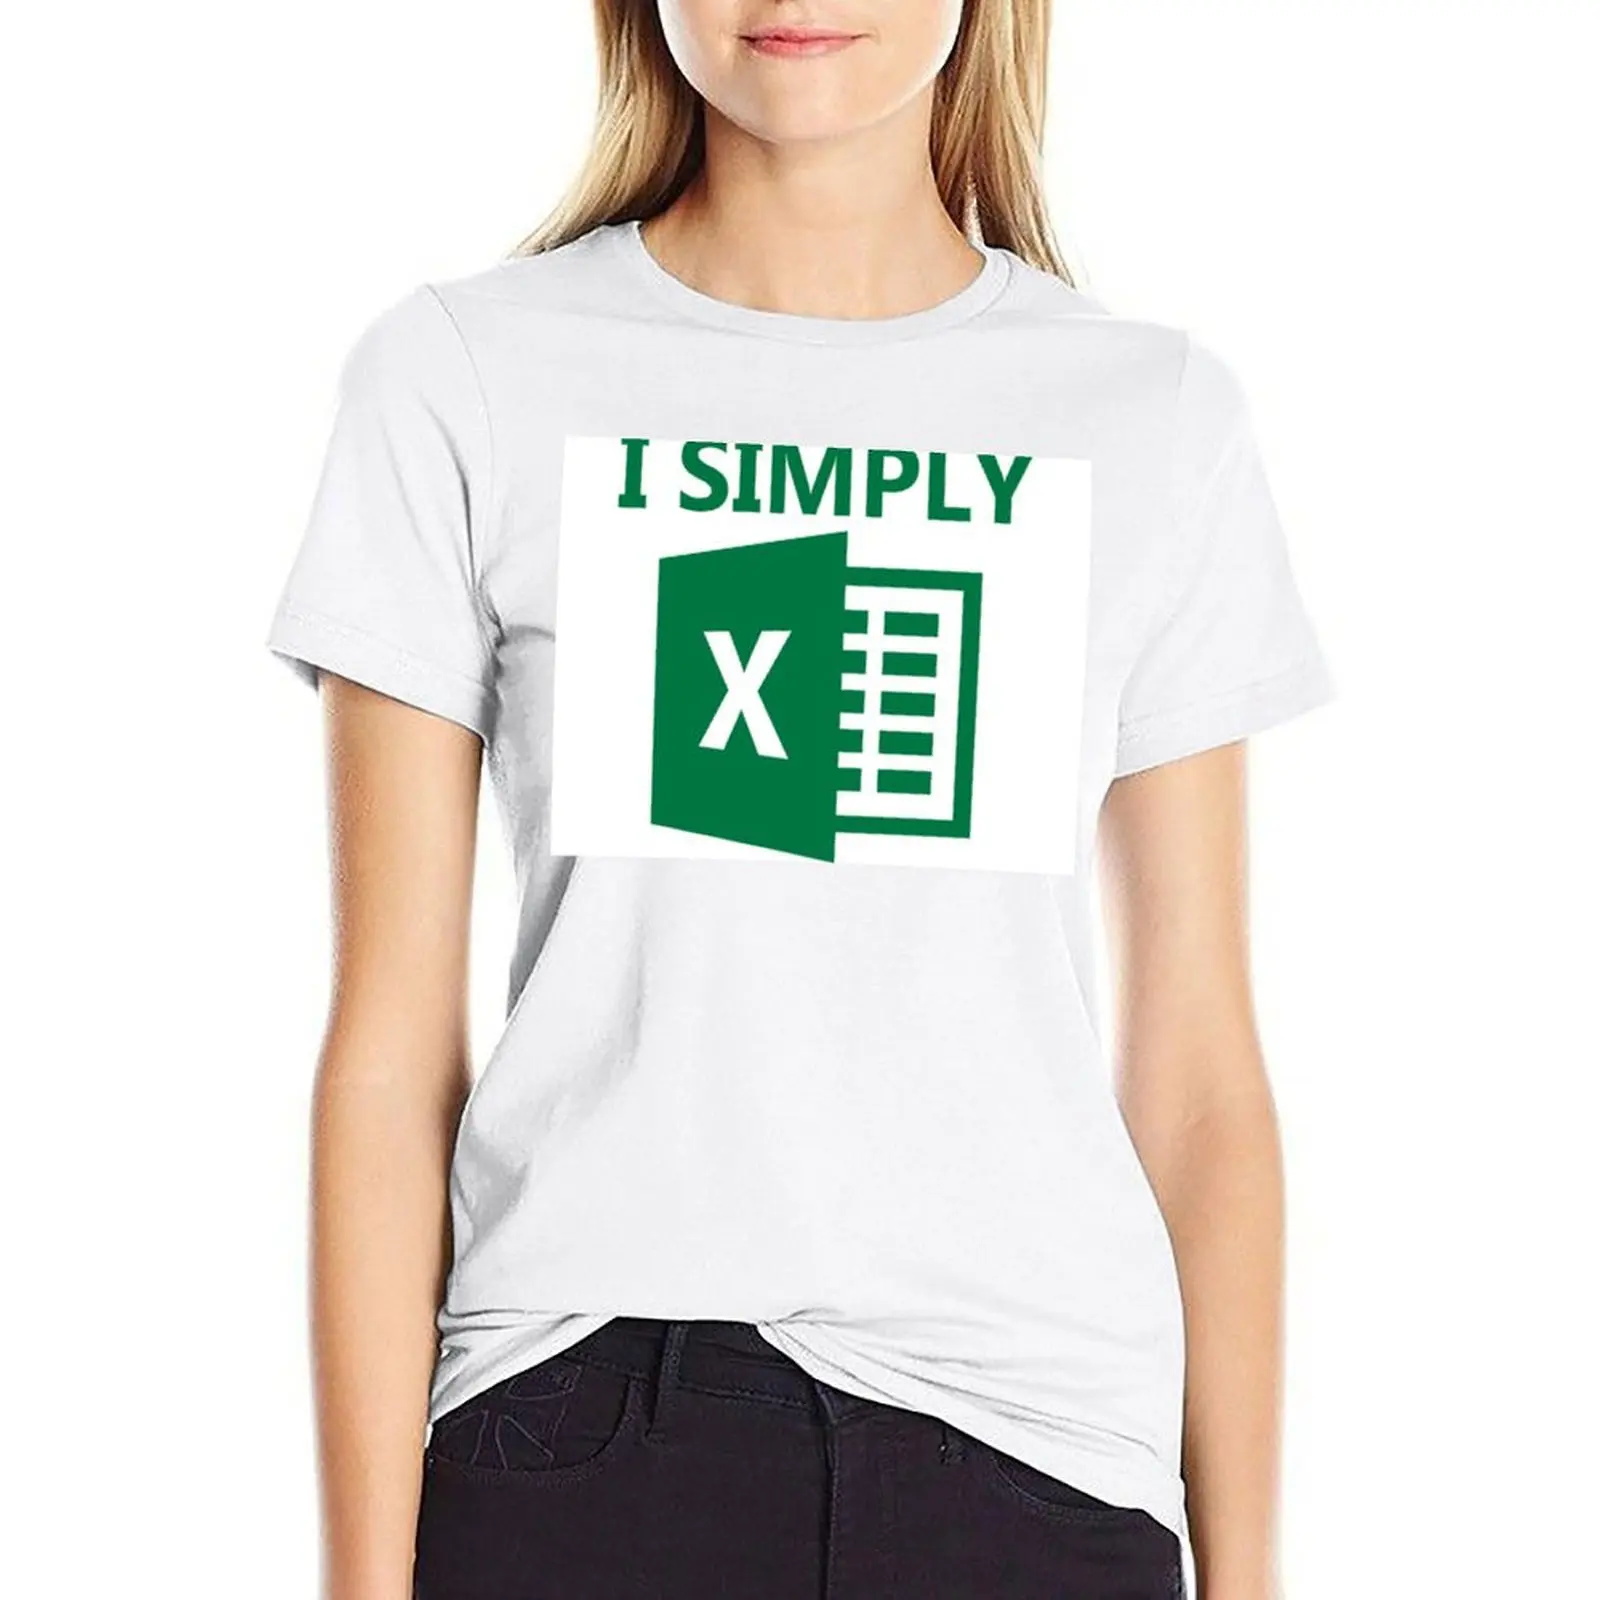 

I Simply Excel T-shirt korean fashion lady clothes rock and roll t shirts for Women